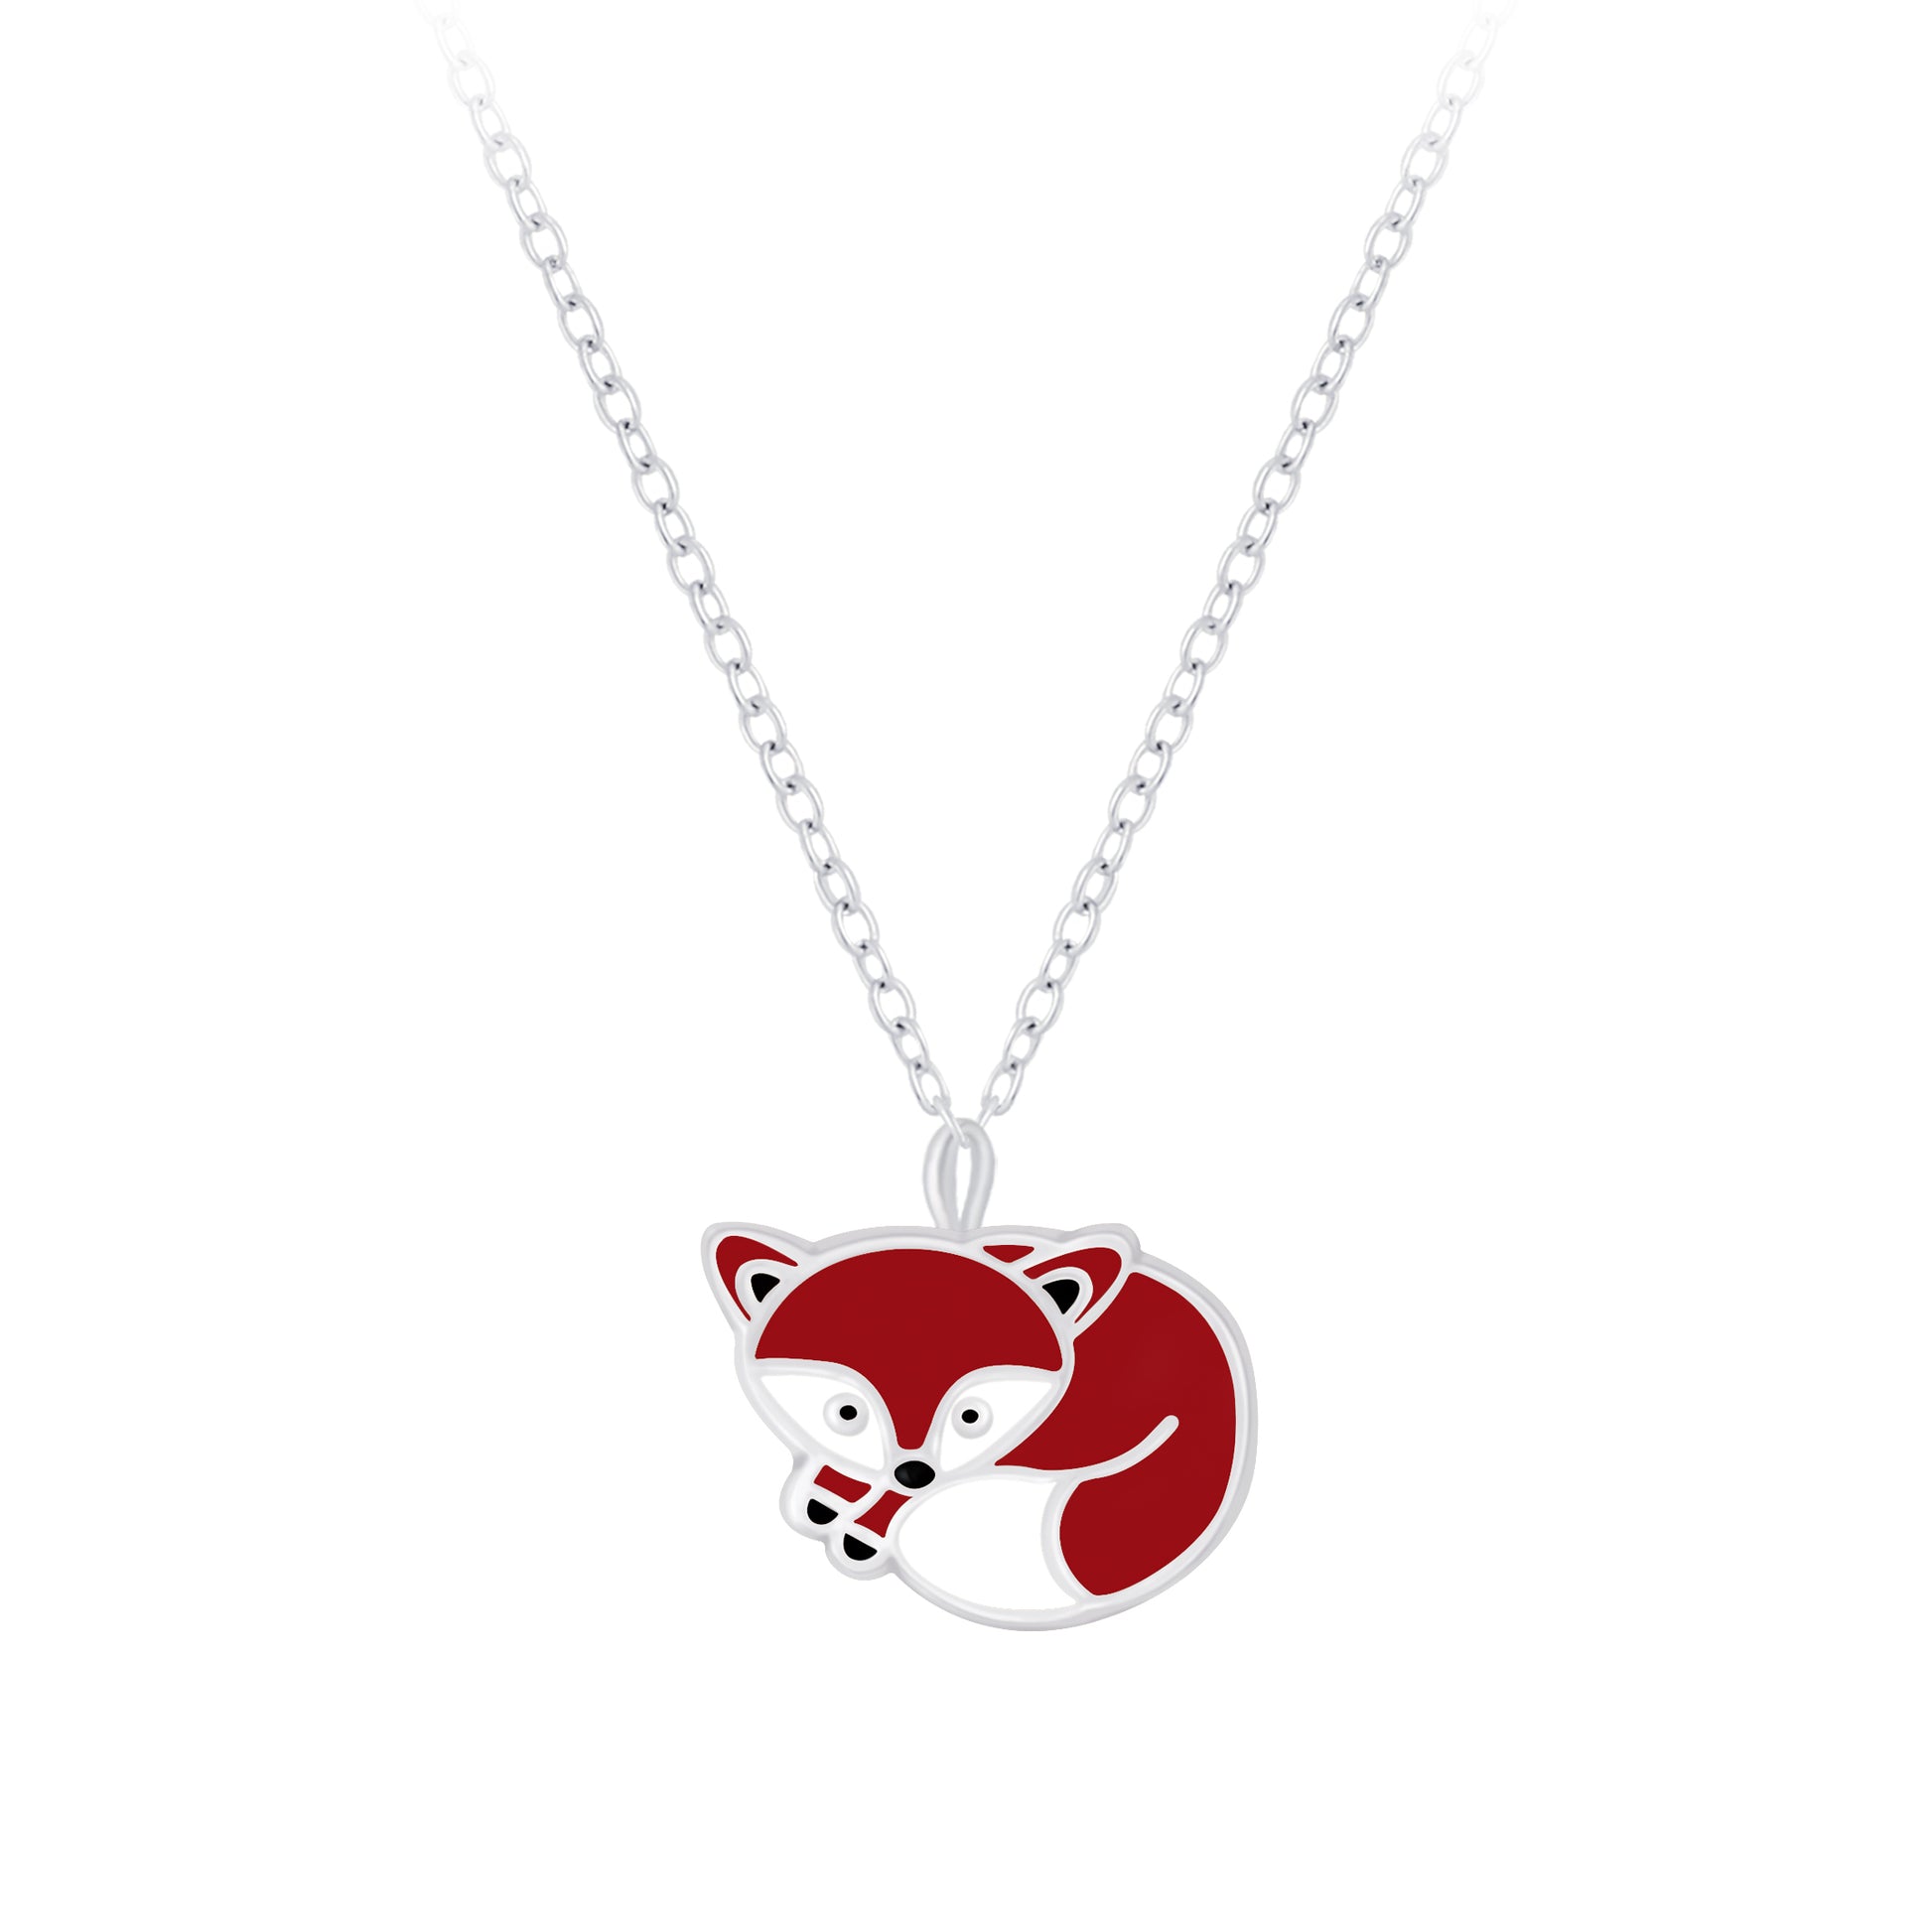 This fantastic fox dainty pendant necklace features a miniature little fox curled up sleeping. 